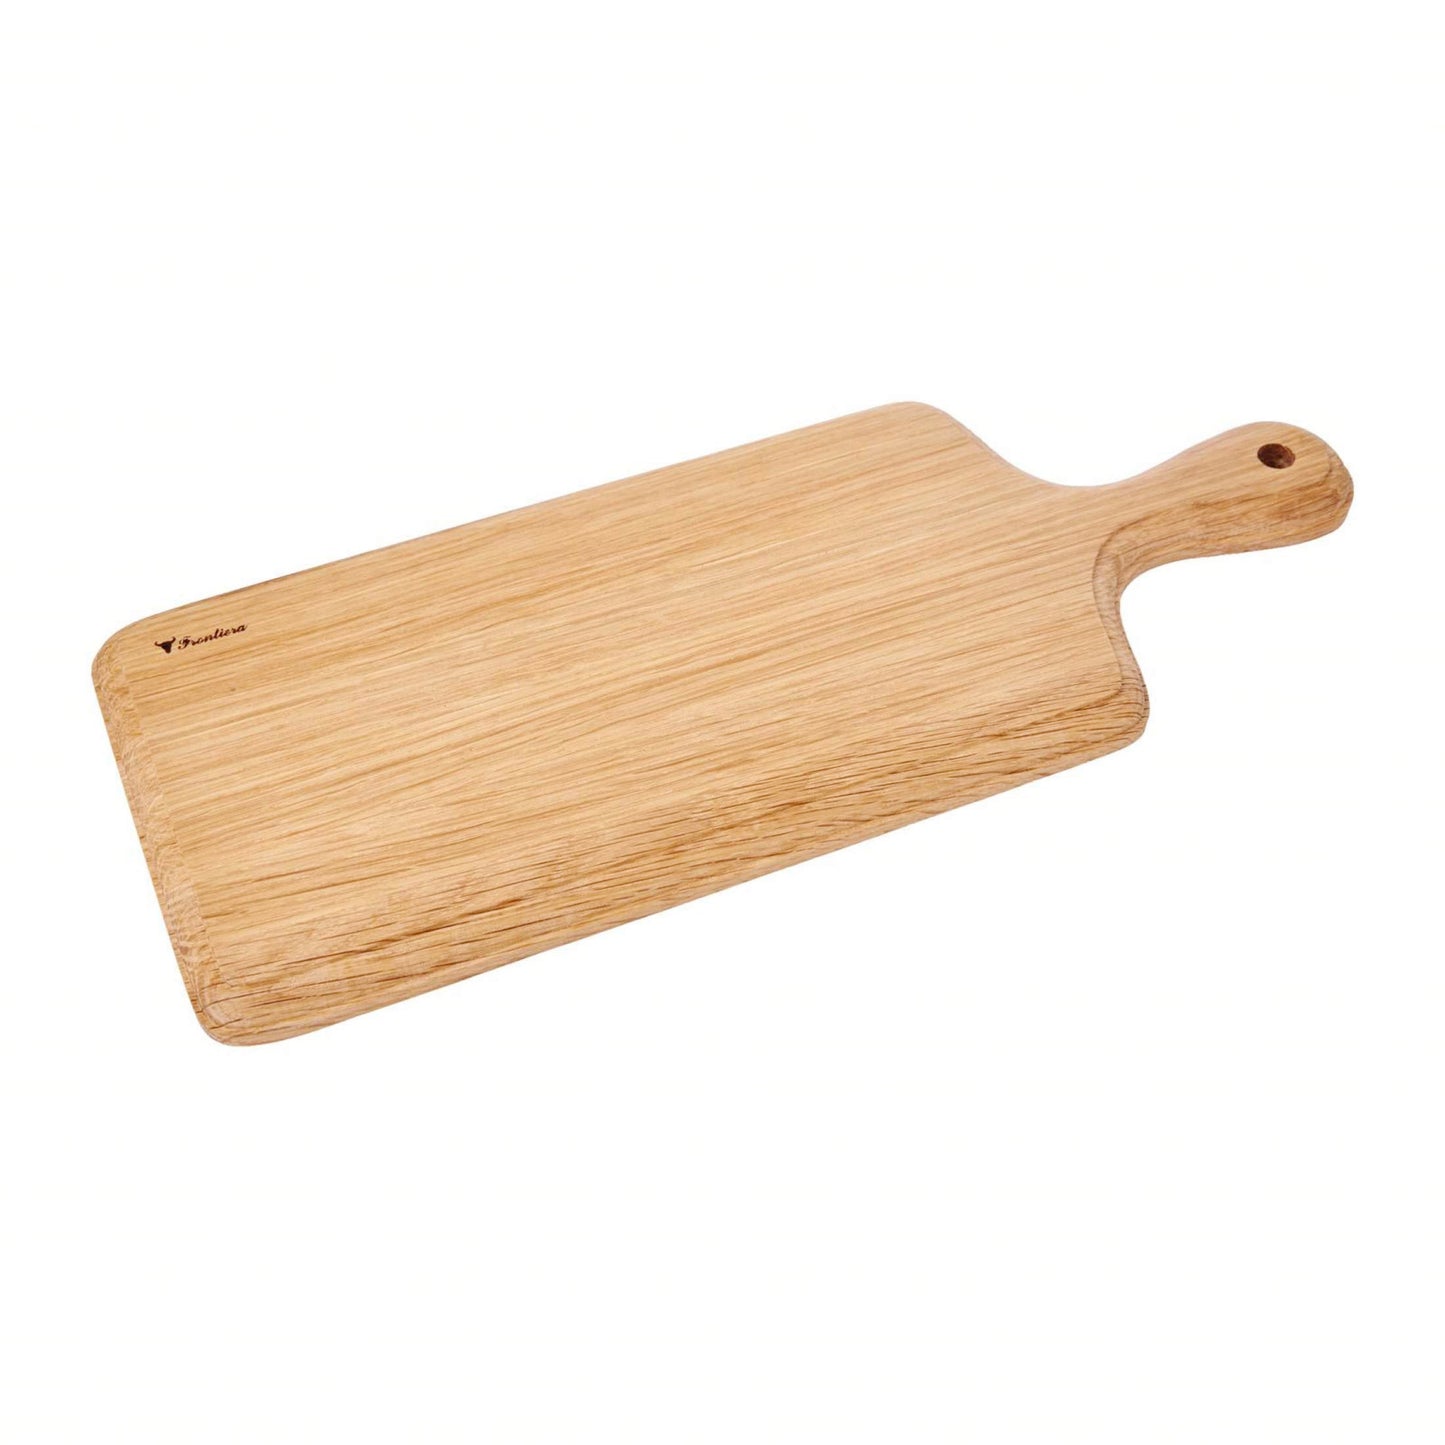 Frontiera Natural Wood Cheese board (Long) 330mm 𝟒𝟎% 𝐎𝐅𝐅